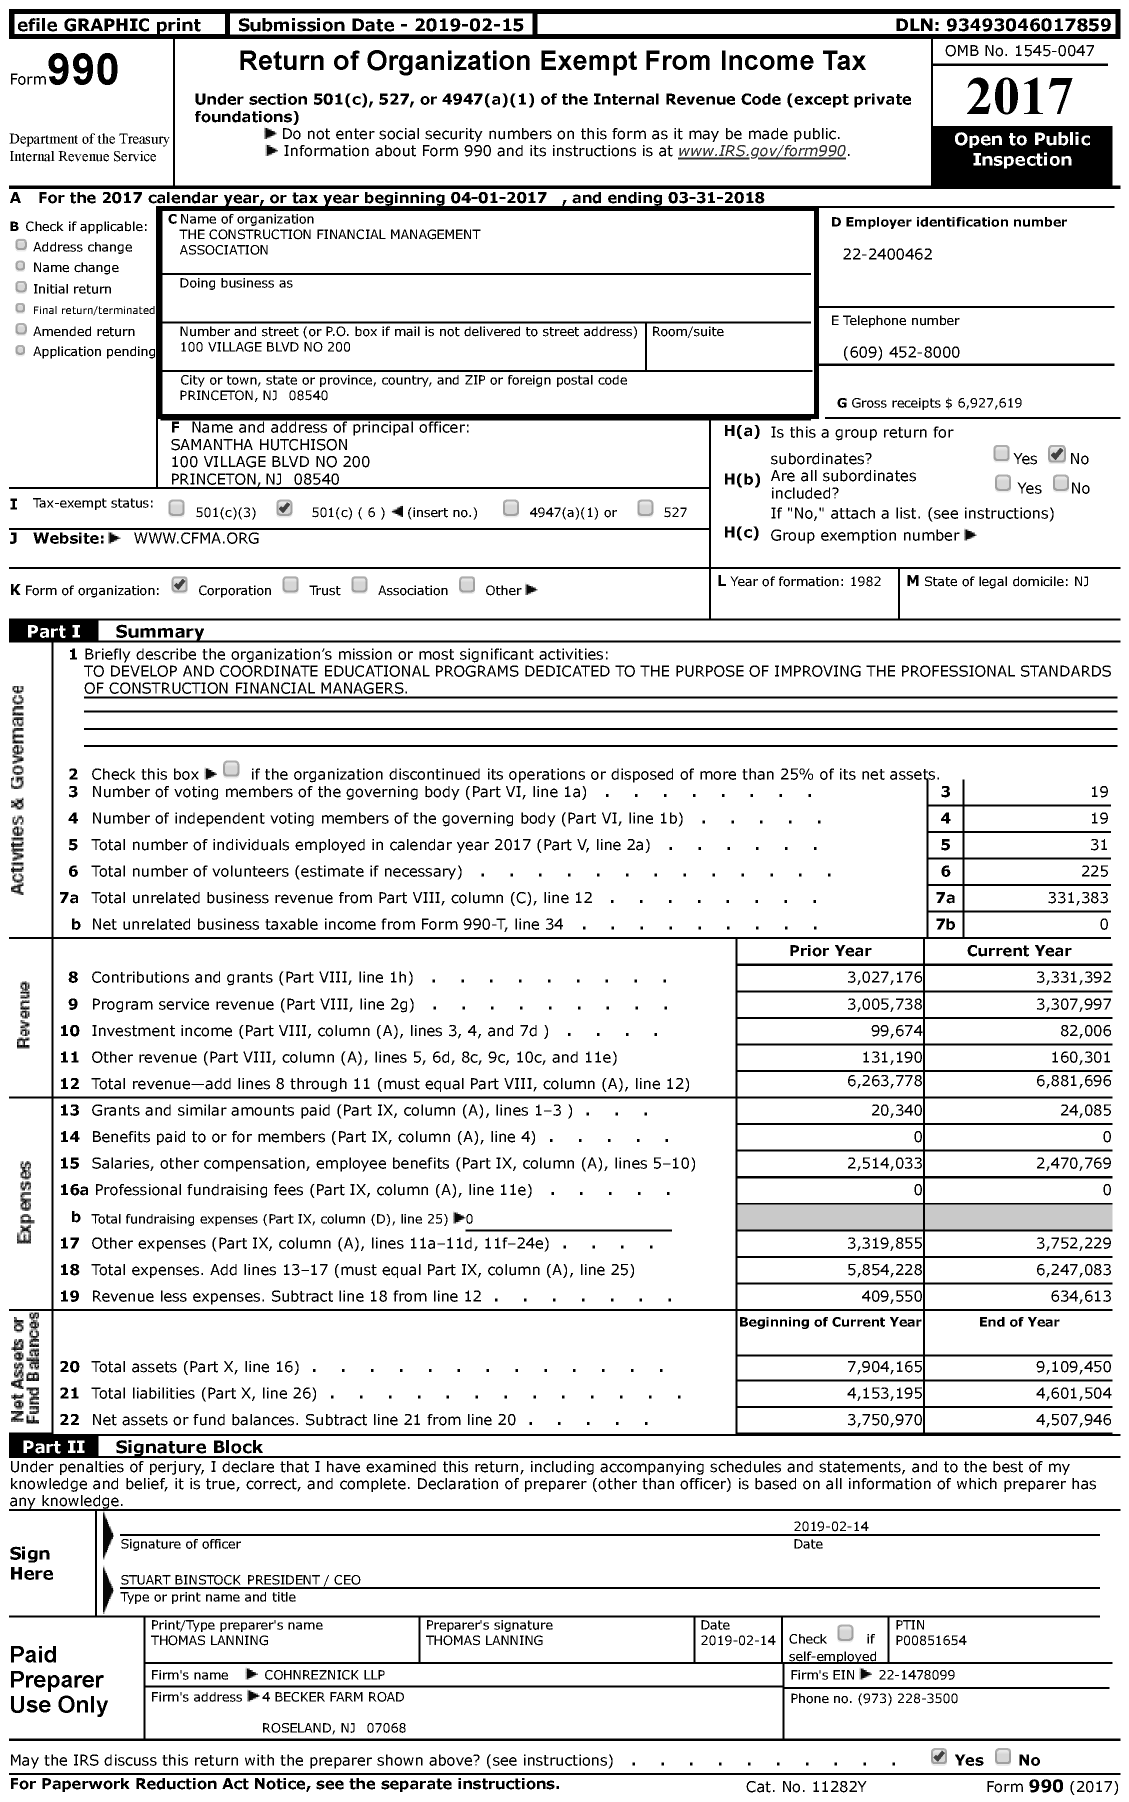 Image of first page of 2017 Form 990 for The Construction Financial Management Association